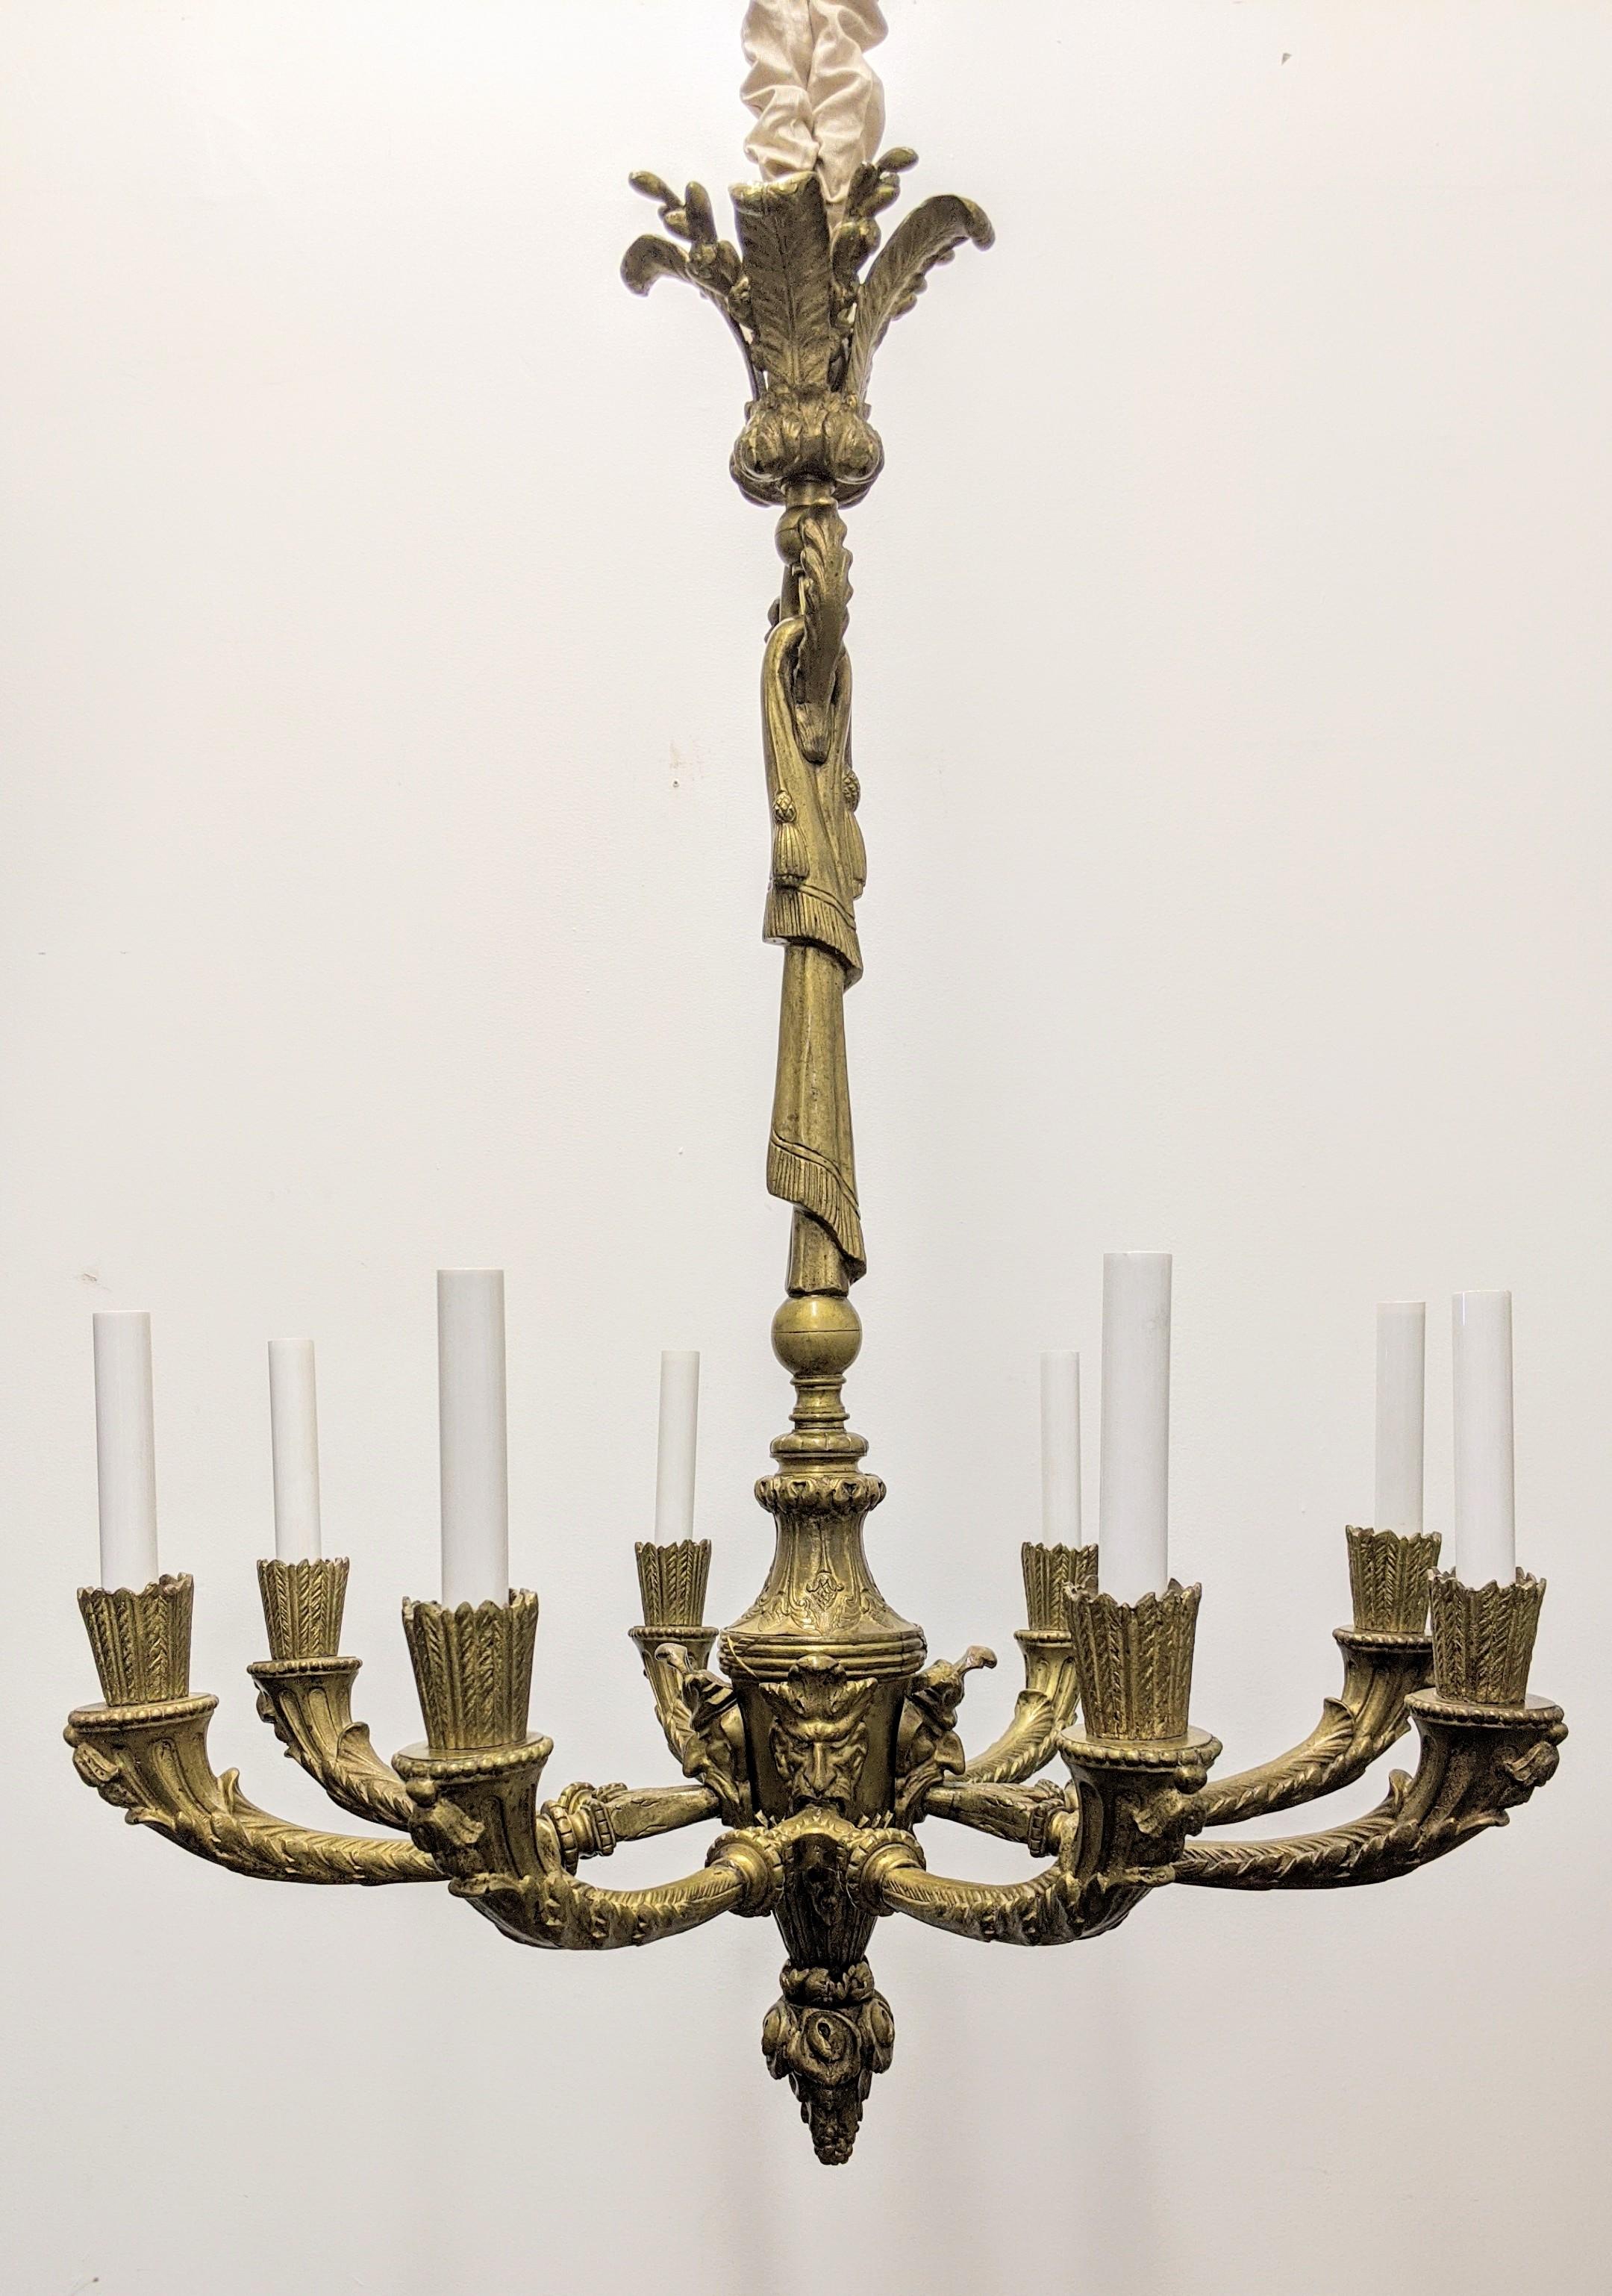 Antique empire chandelier, circa 1870's - 1880's. Originally made for candles, converted to electric. Exquisite bronze casting details with four double arms eight lights with decorative motifs throughout. Rewired to U.S. standards, accommodate